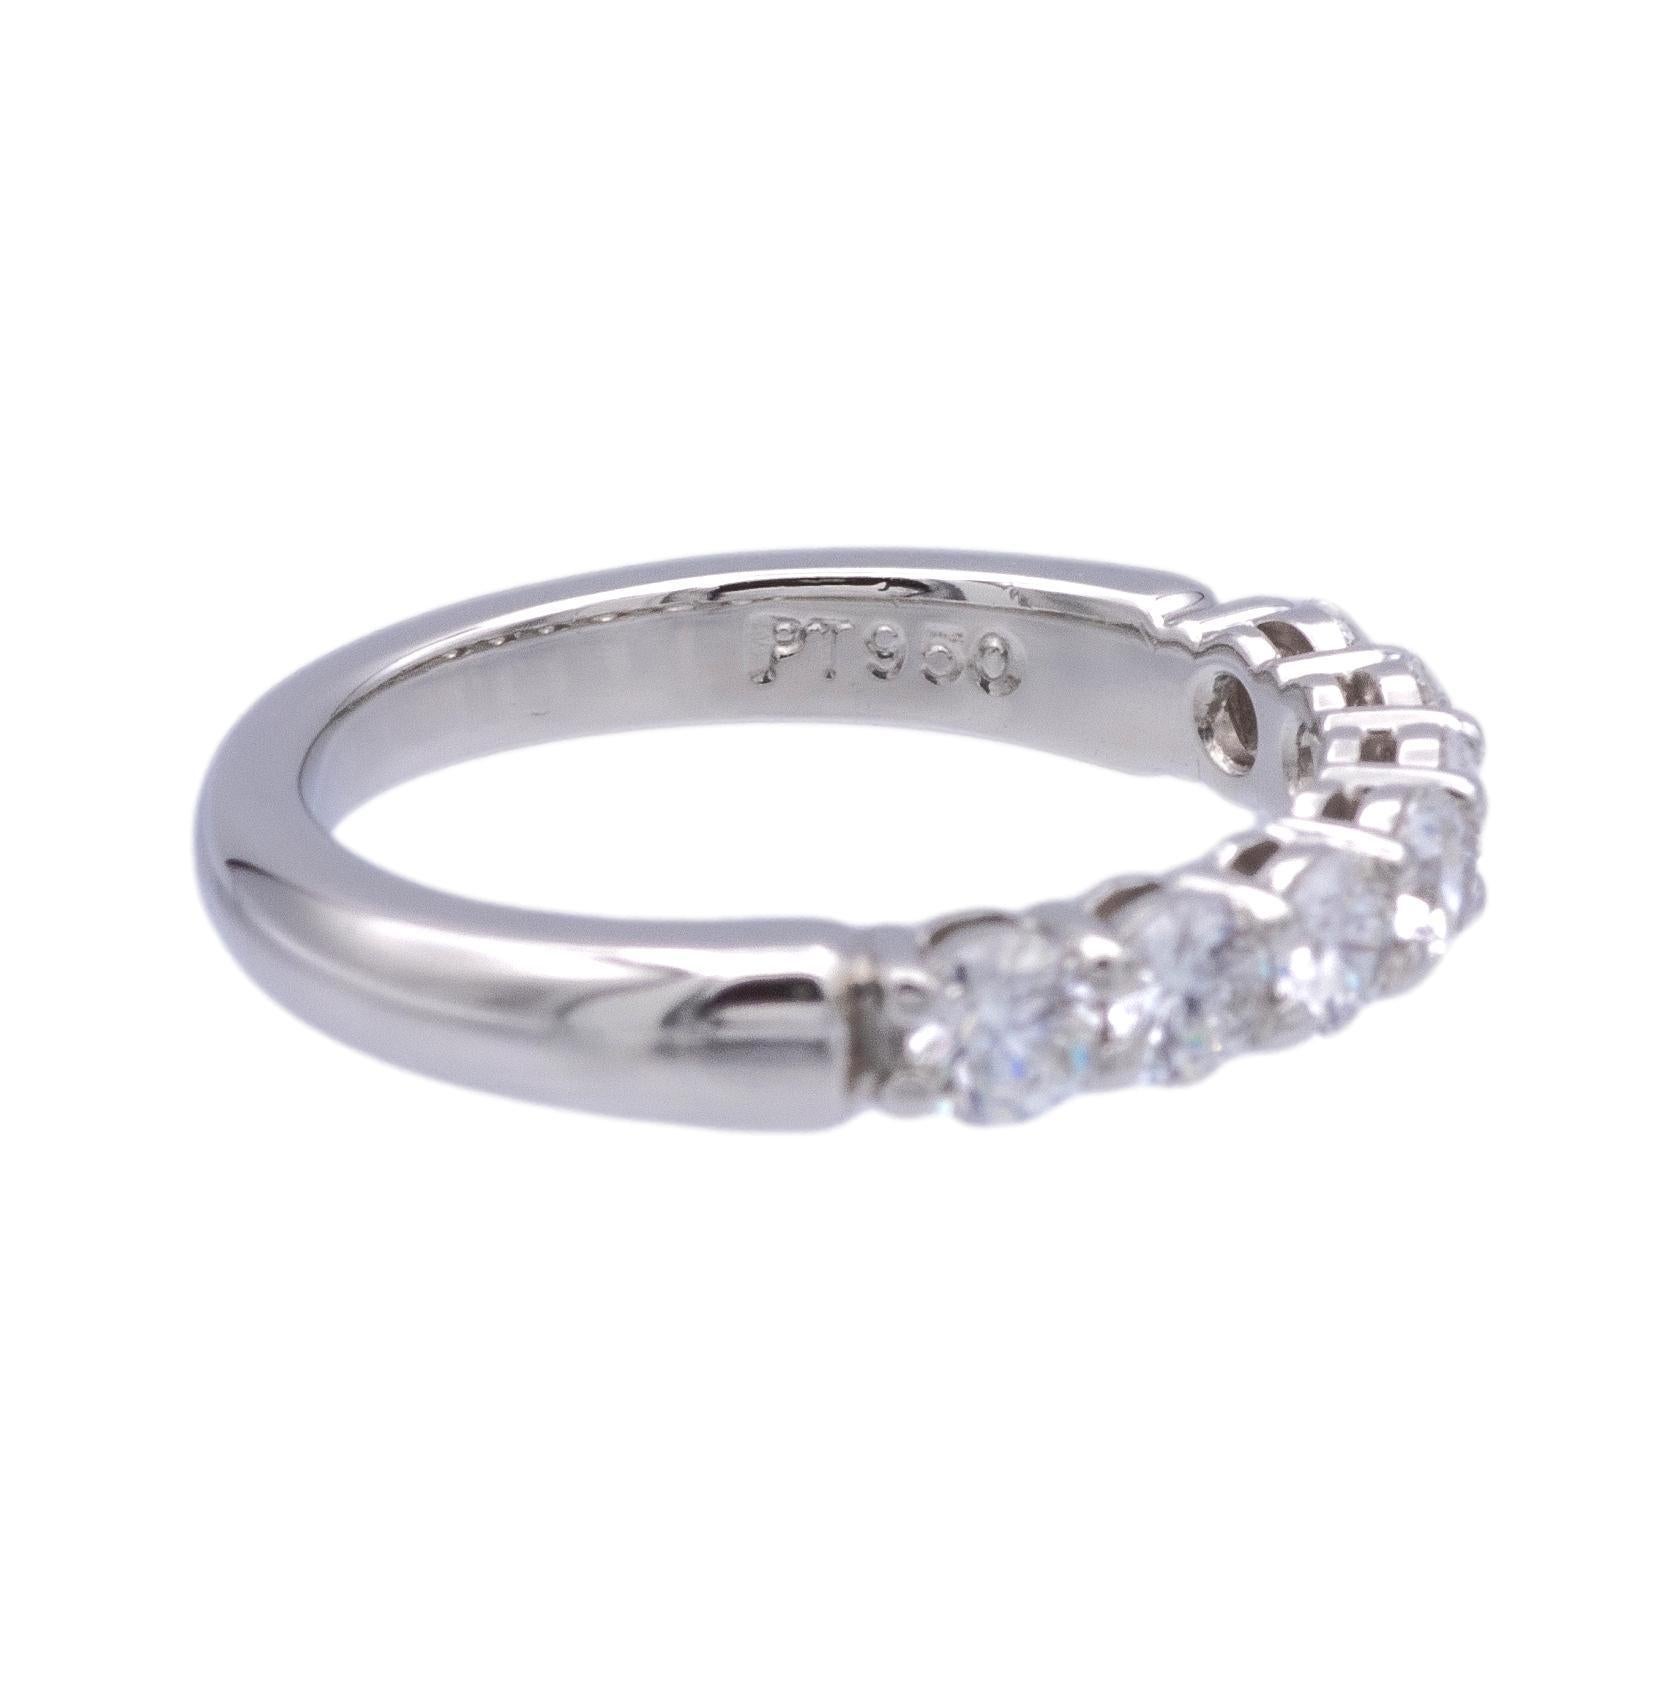 Tiffany & Co. Platinum 7 Stone Forever Half Circle Diamond Band Ring .57ct TW In Excellent Condition For Sale In New York, NY